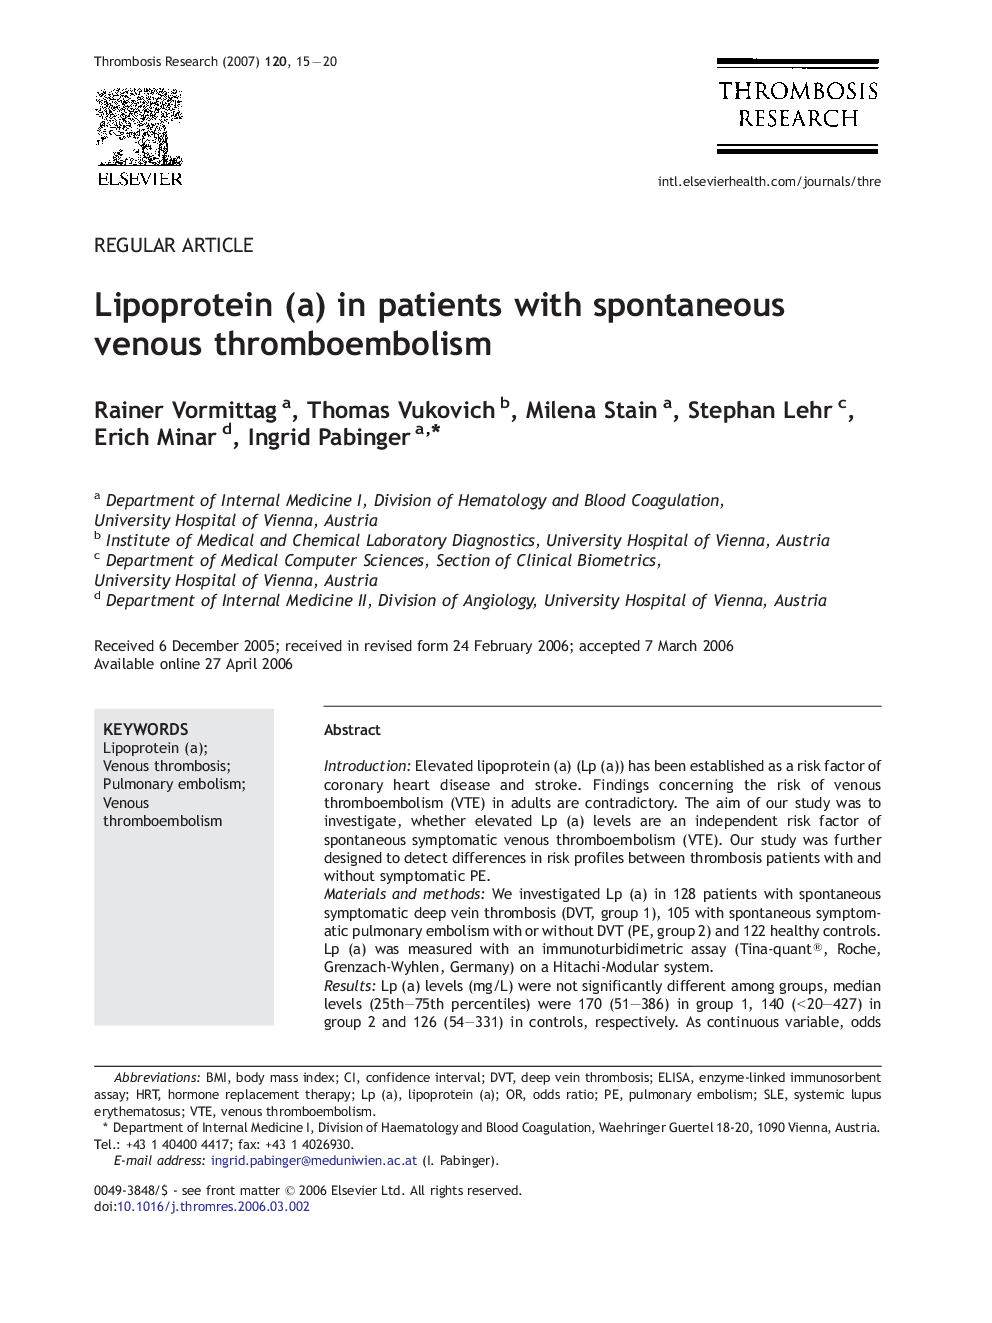 Lipoprotein (a) in patients with spontaneous venous thromboembolism